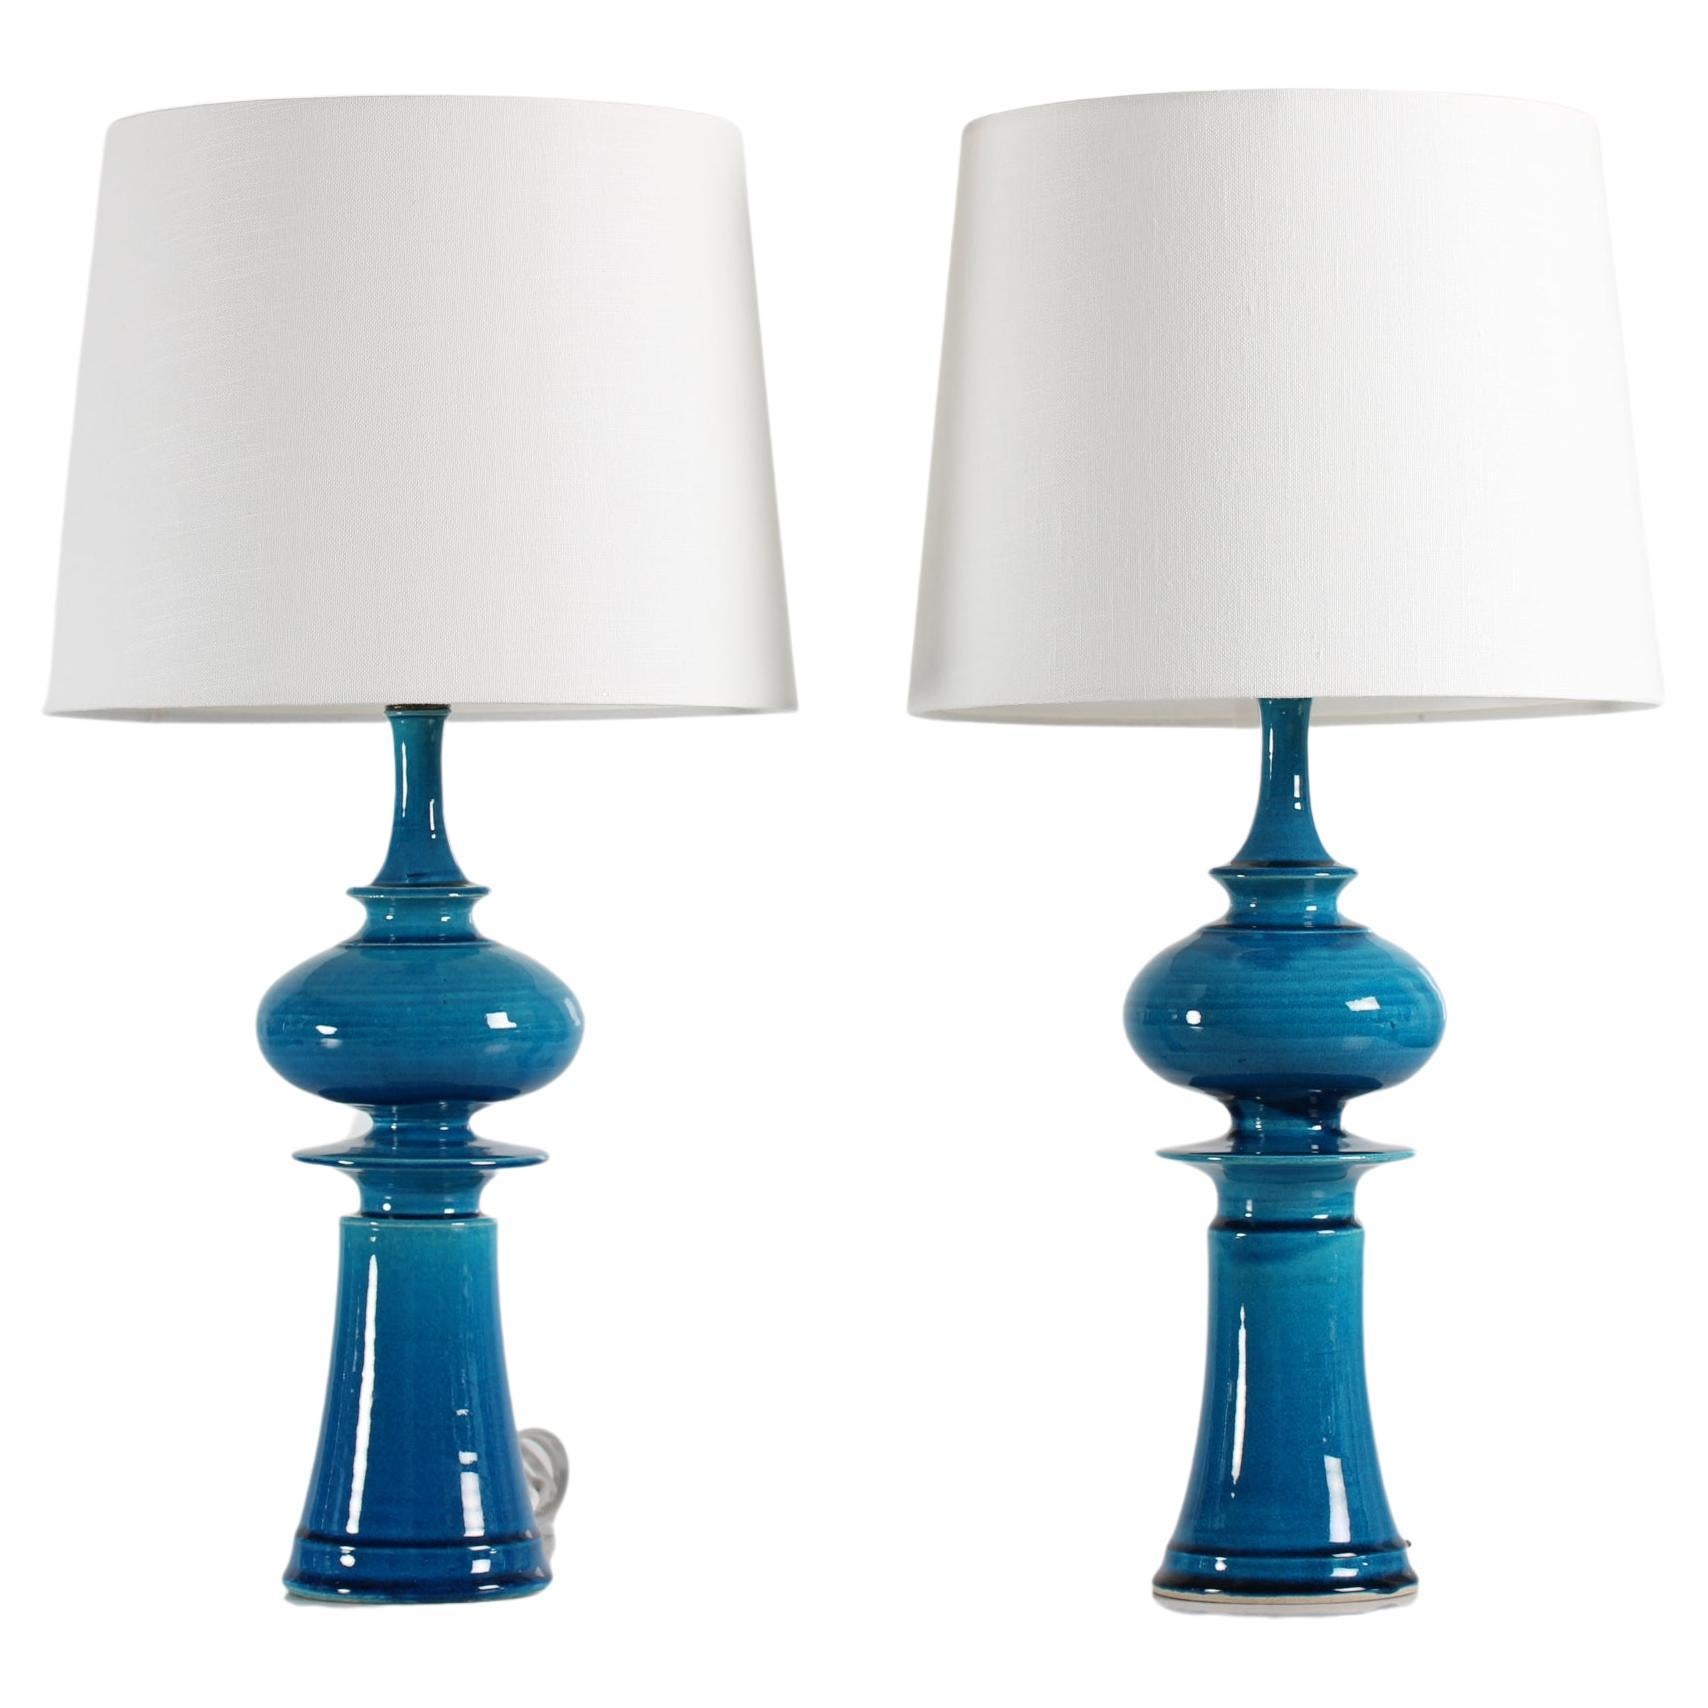 Pair of Kähler Tall Sculptural Turquoise Table Lamps by Poul Erik Eliasen, 1970s For Sale